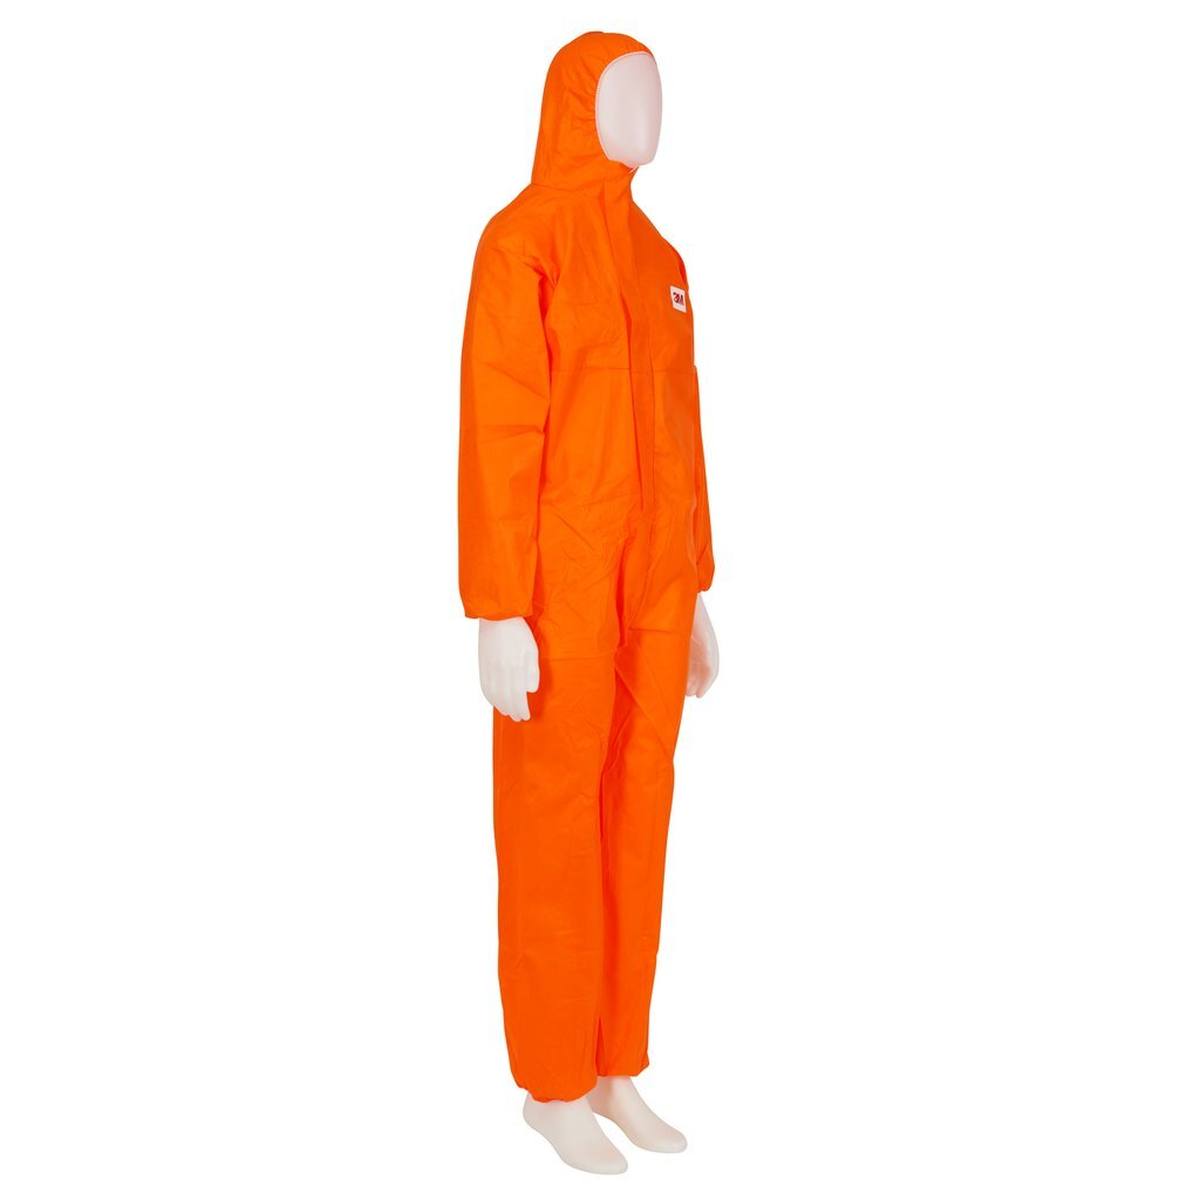 3M 4515O Protective suit, orange, TYPE 5/6, size XL, material SMMS low-lint, elasticated cuffs